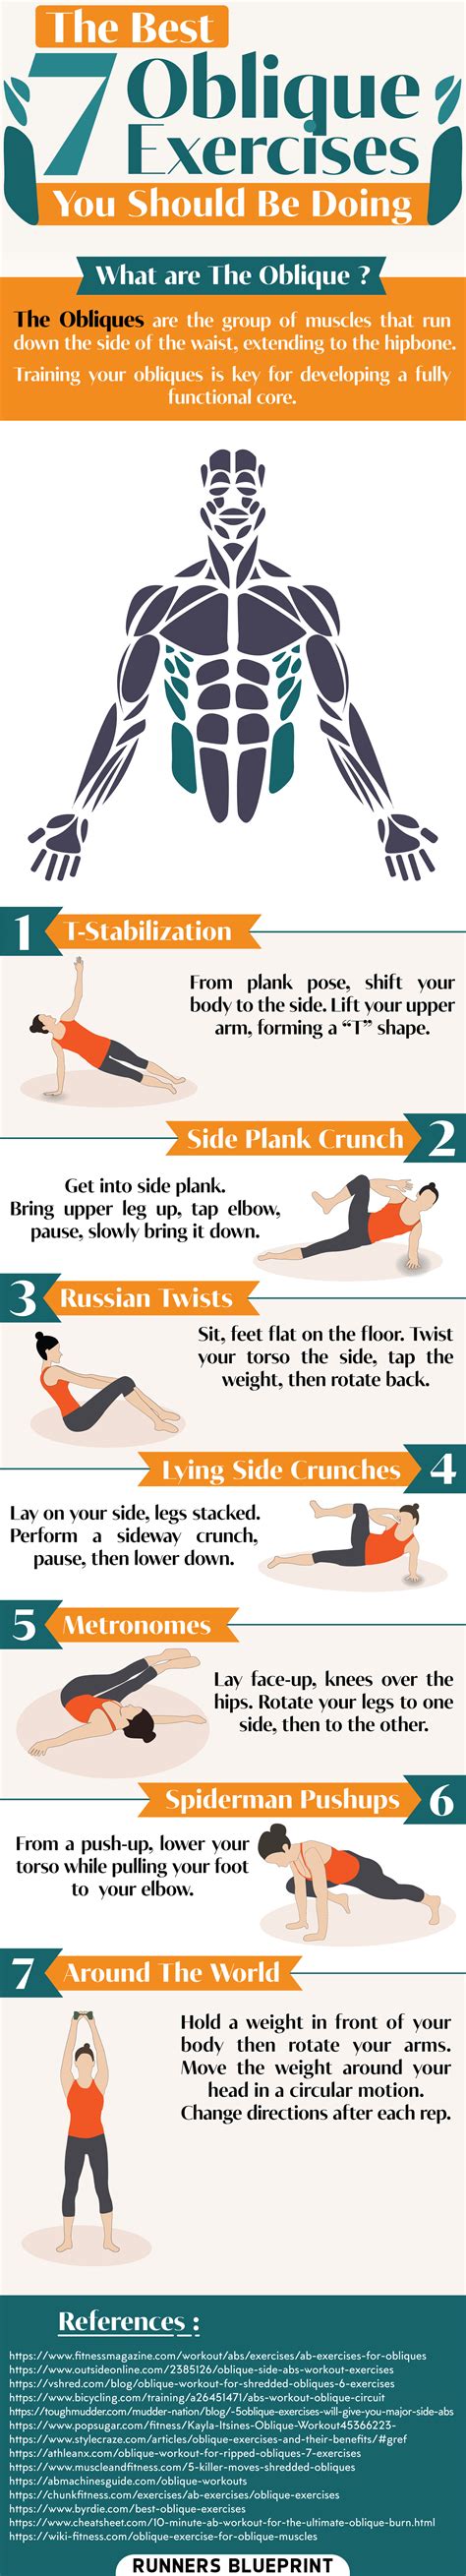 The Best Oblique Exercises A Minute Side Abs Workout Routine